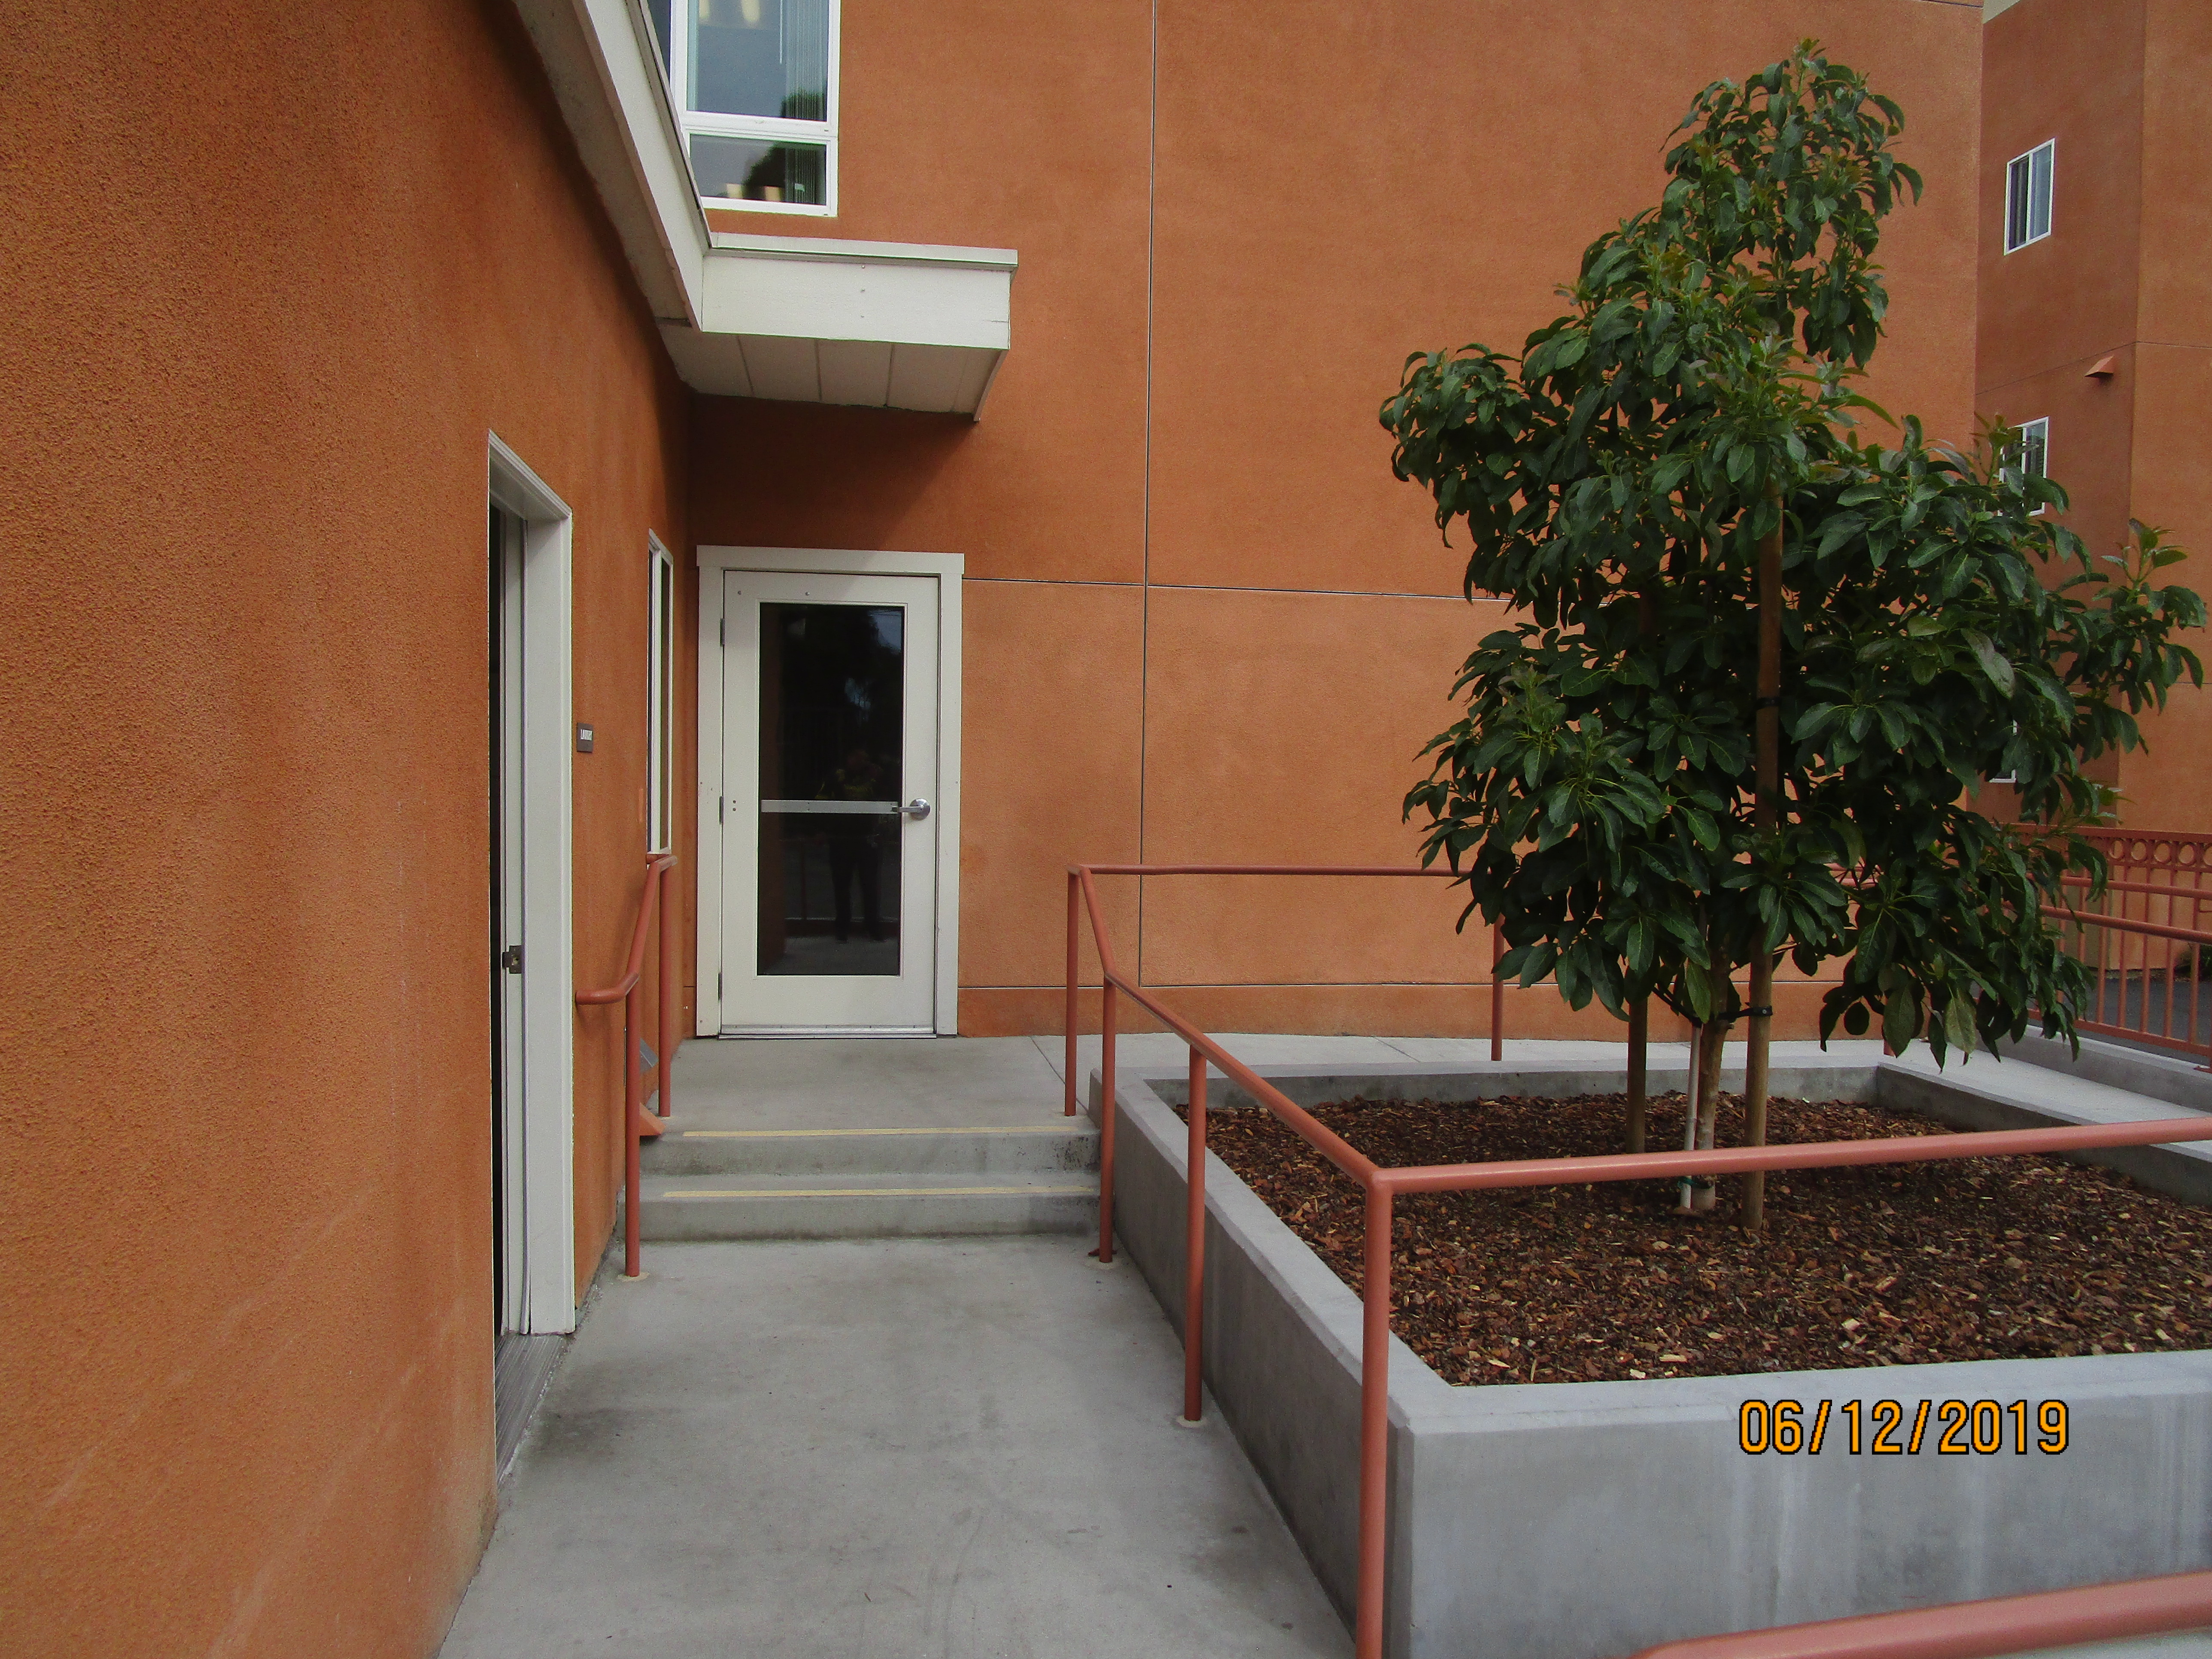 Image of the building side entrance